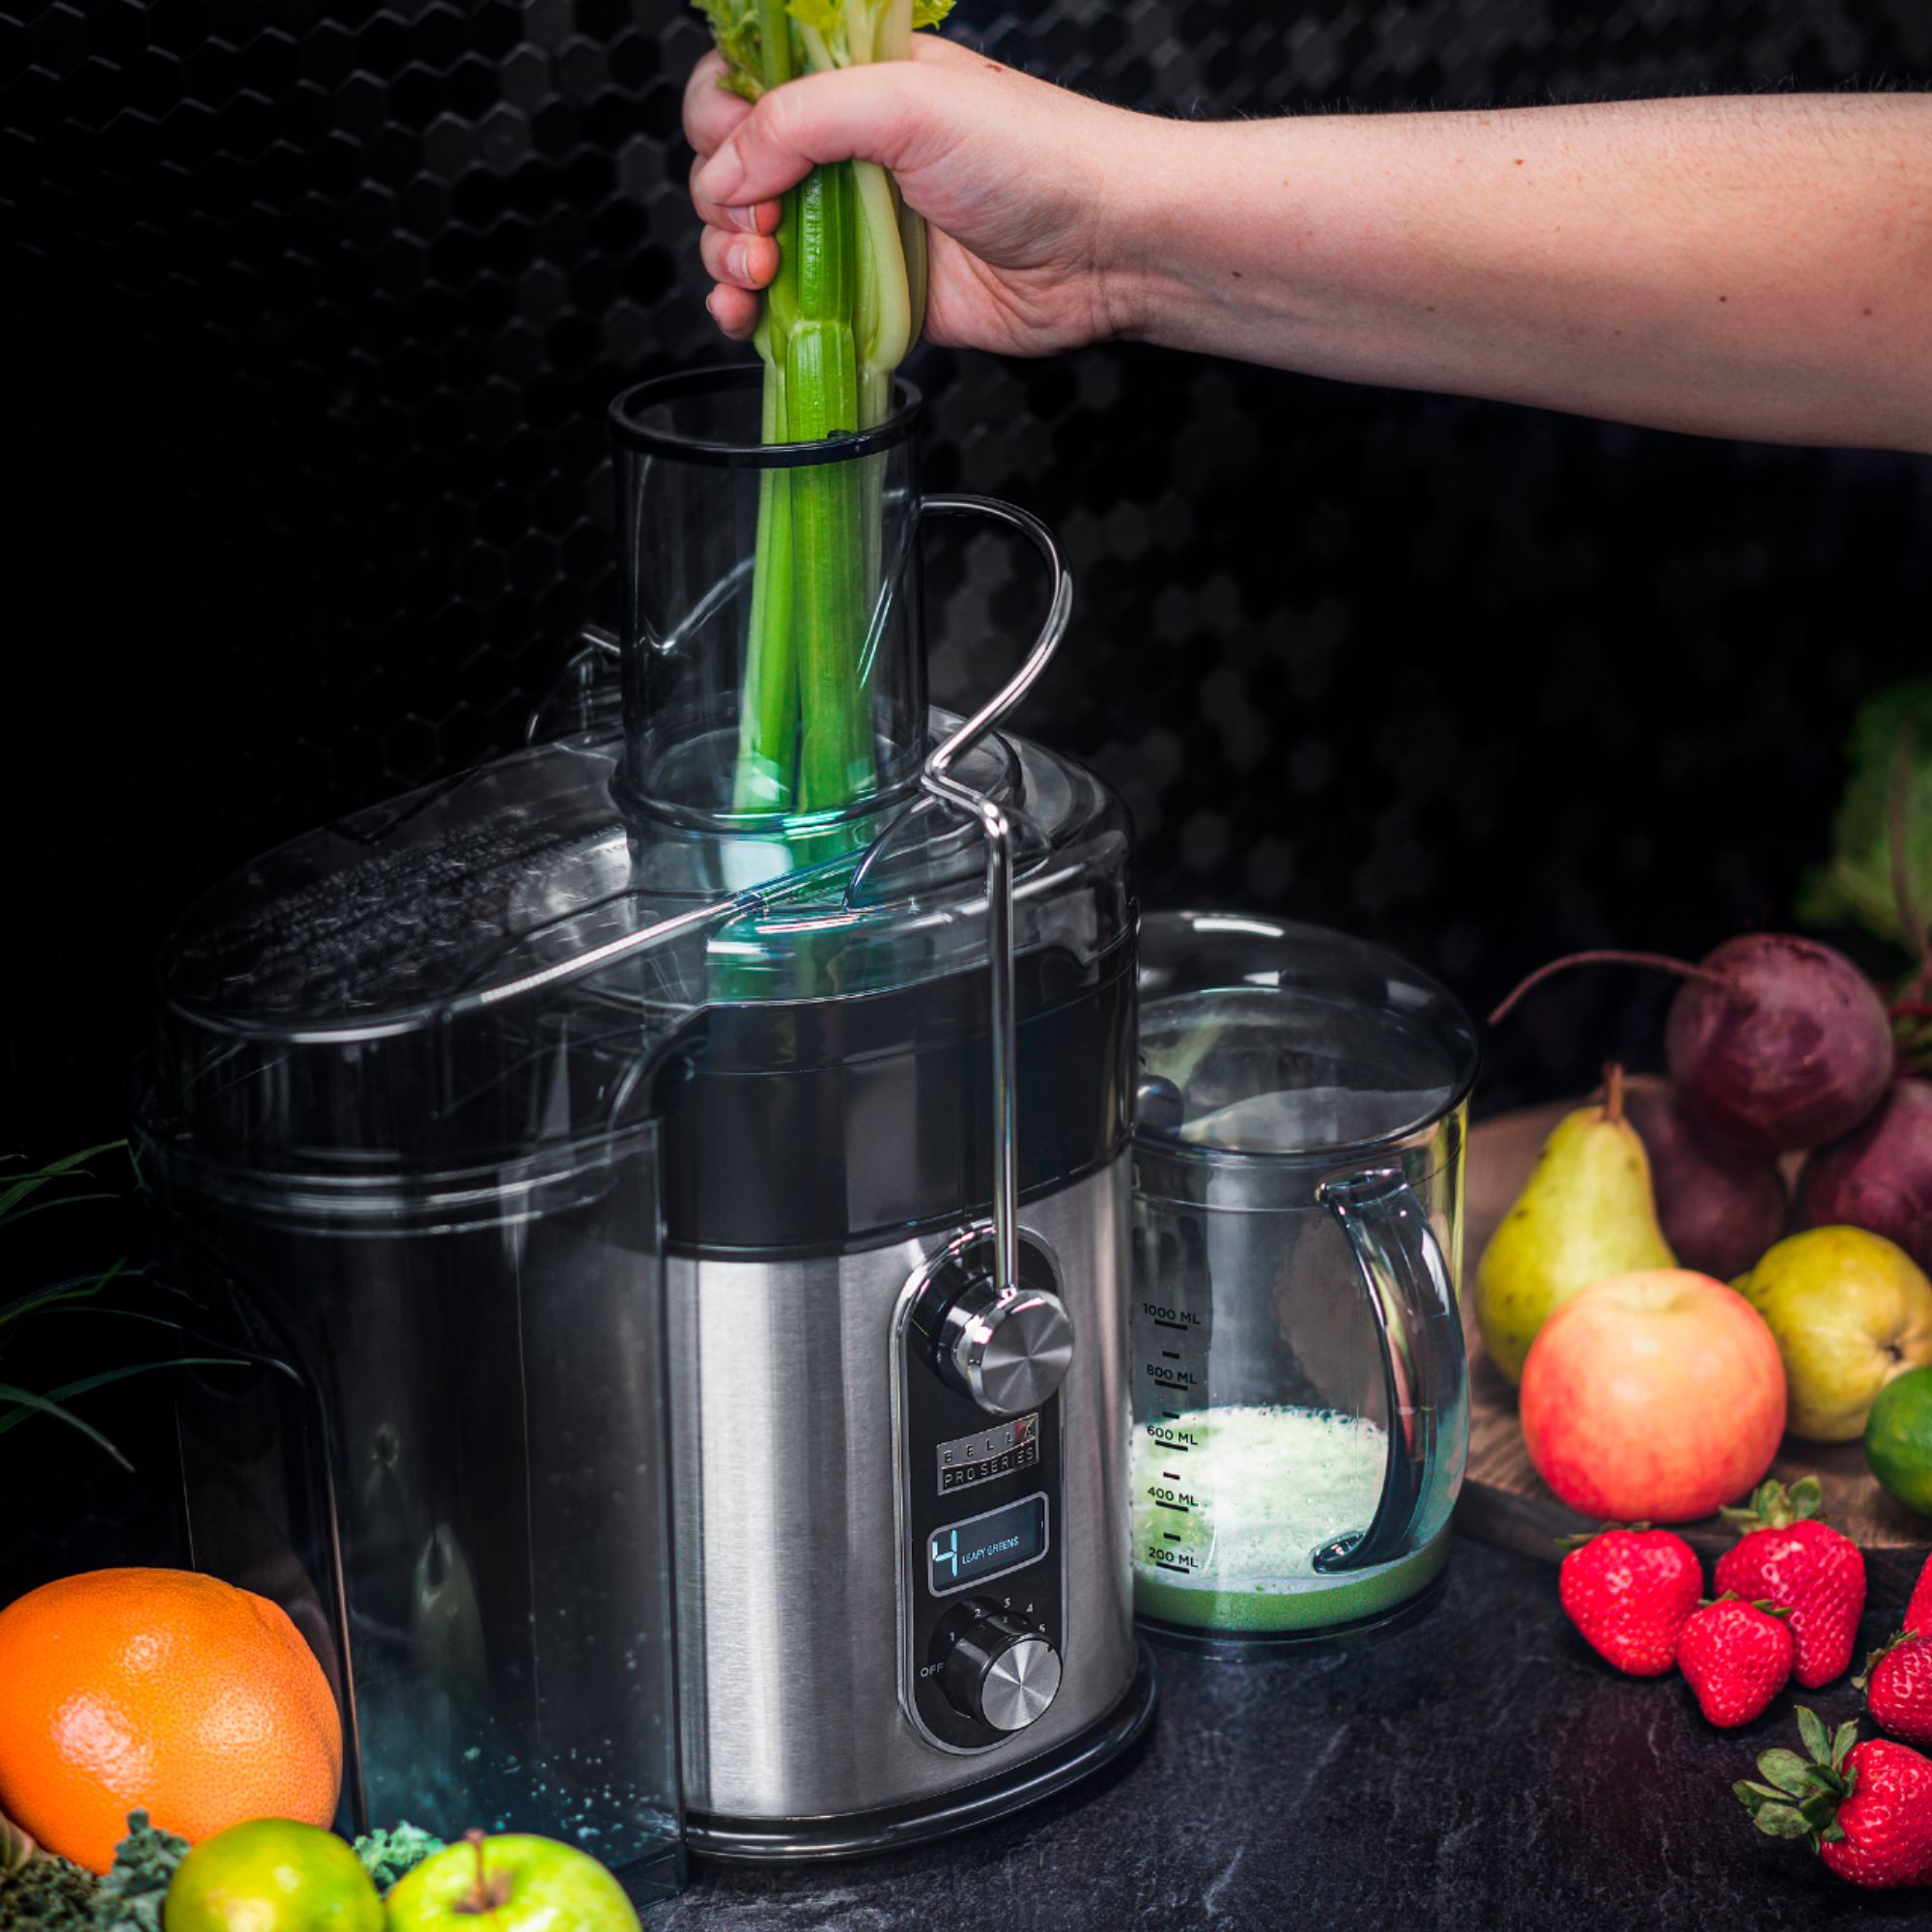 Juicers: Fast Centrifugal Juice Extractors for Fruits & Vegetables